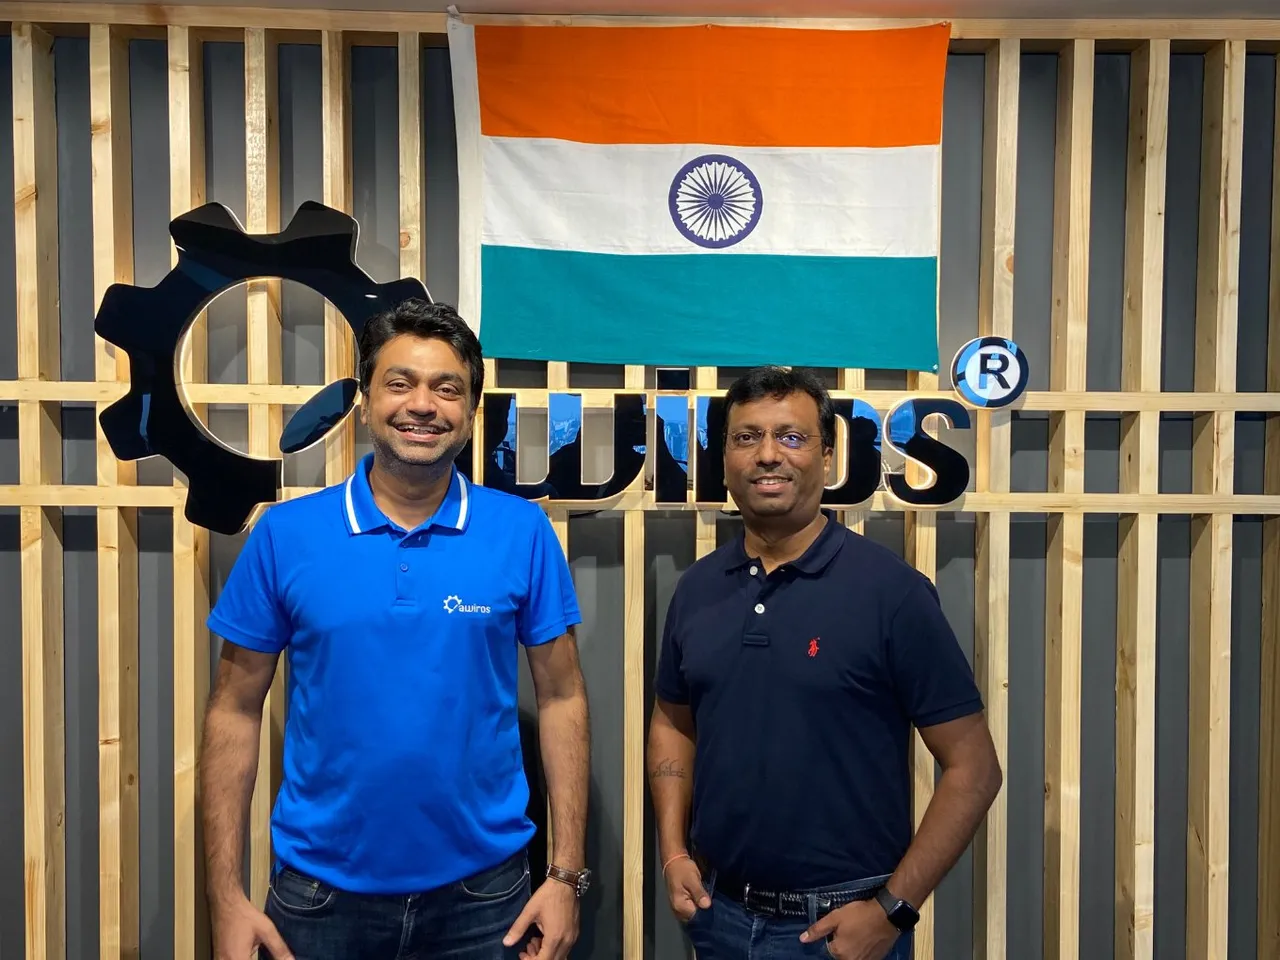 Deeptech startup Awiros raises $7M in funding led by Inflexor Ventures, others